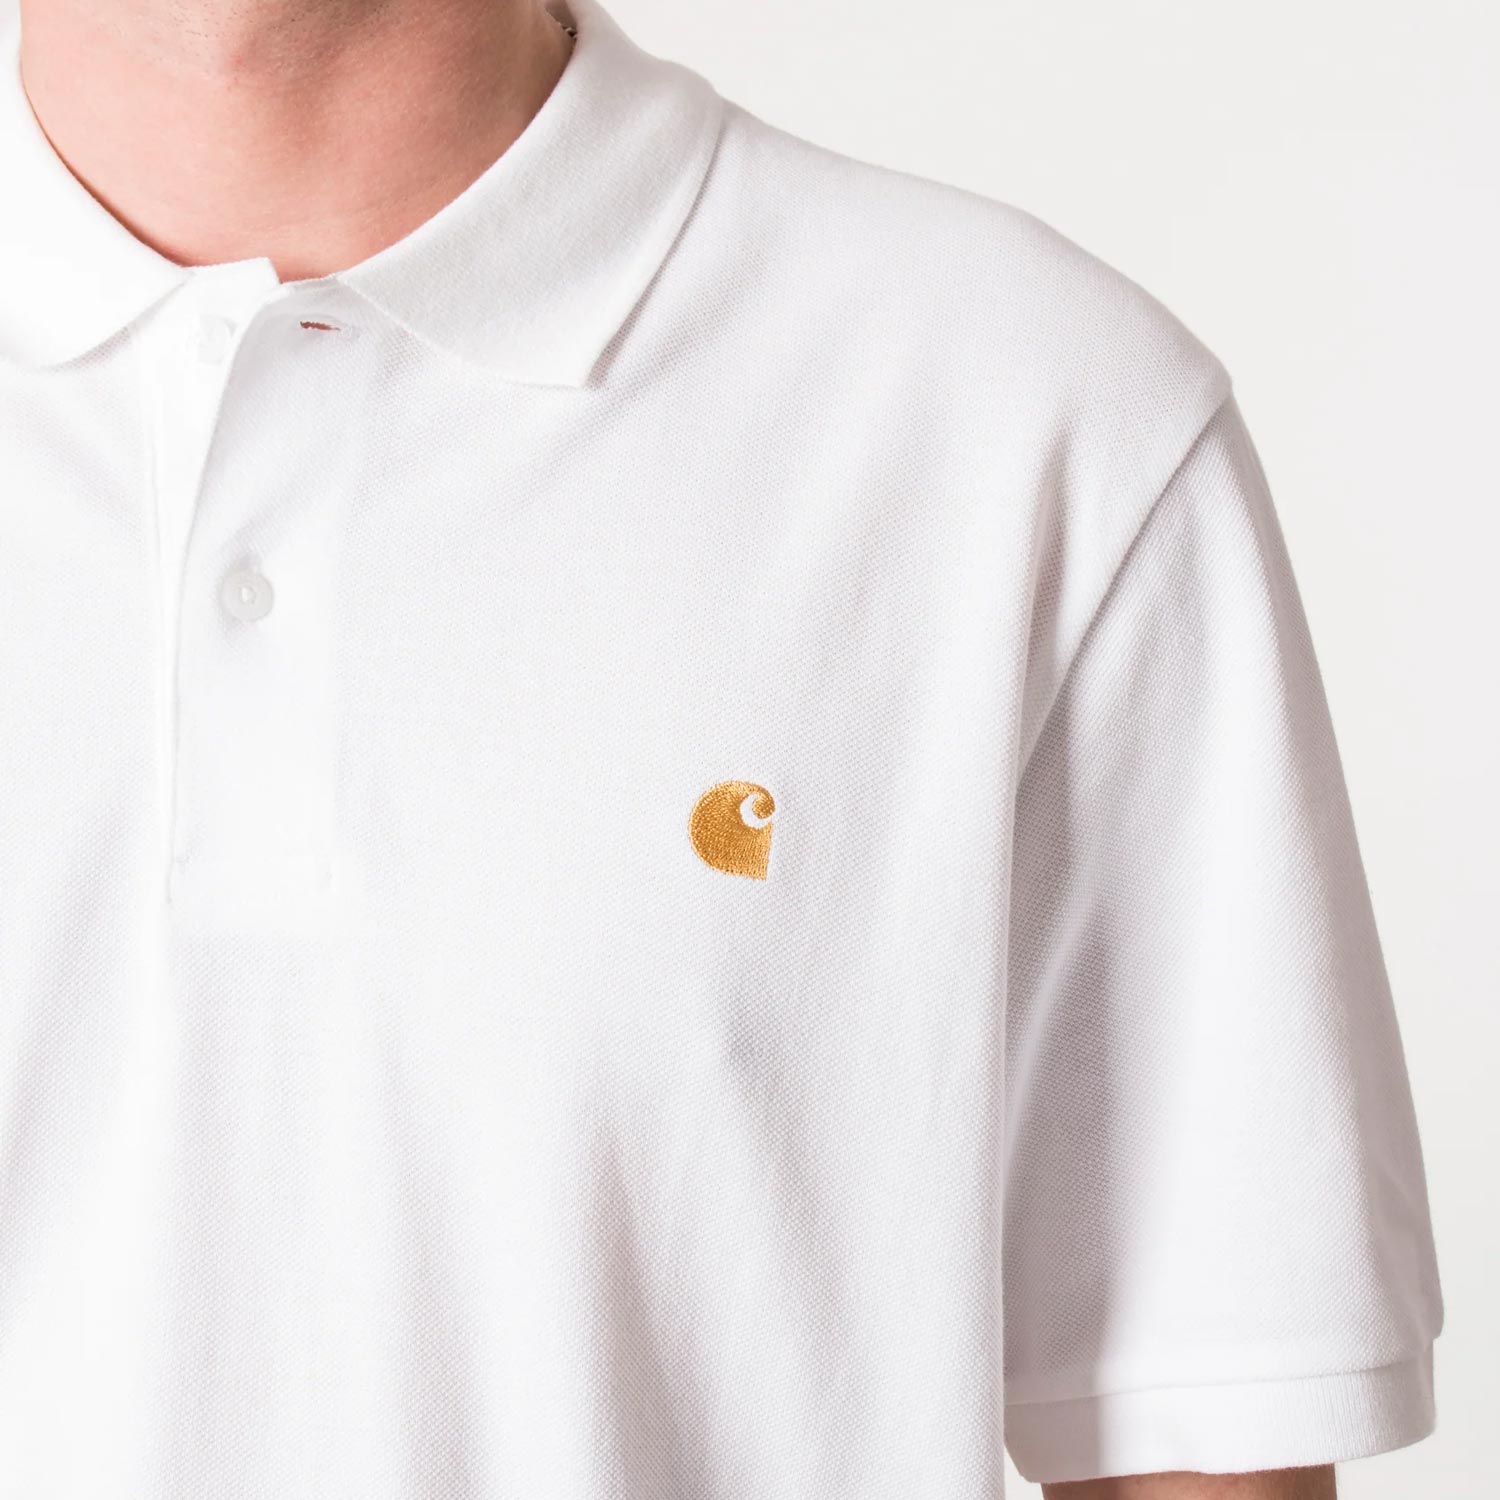 Carhartt WIP Chase Loose Fit Short Sleeve Pique Polo - White/Gold